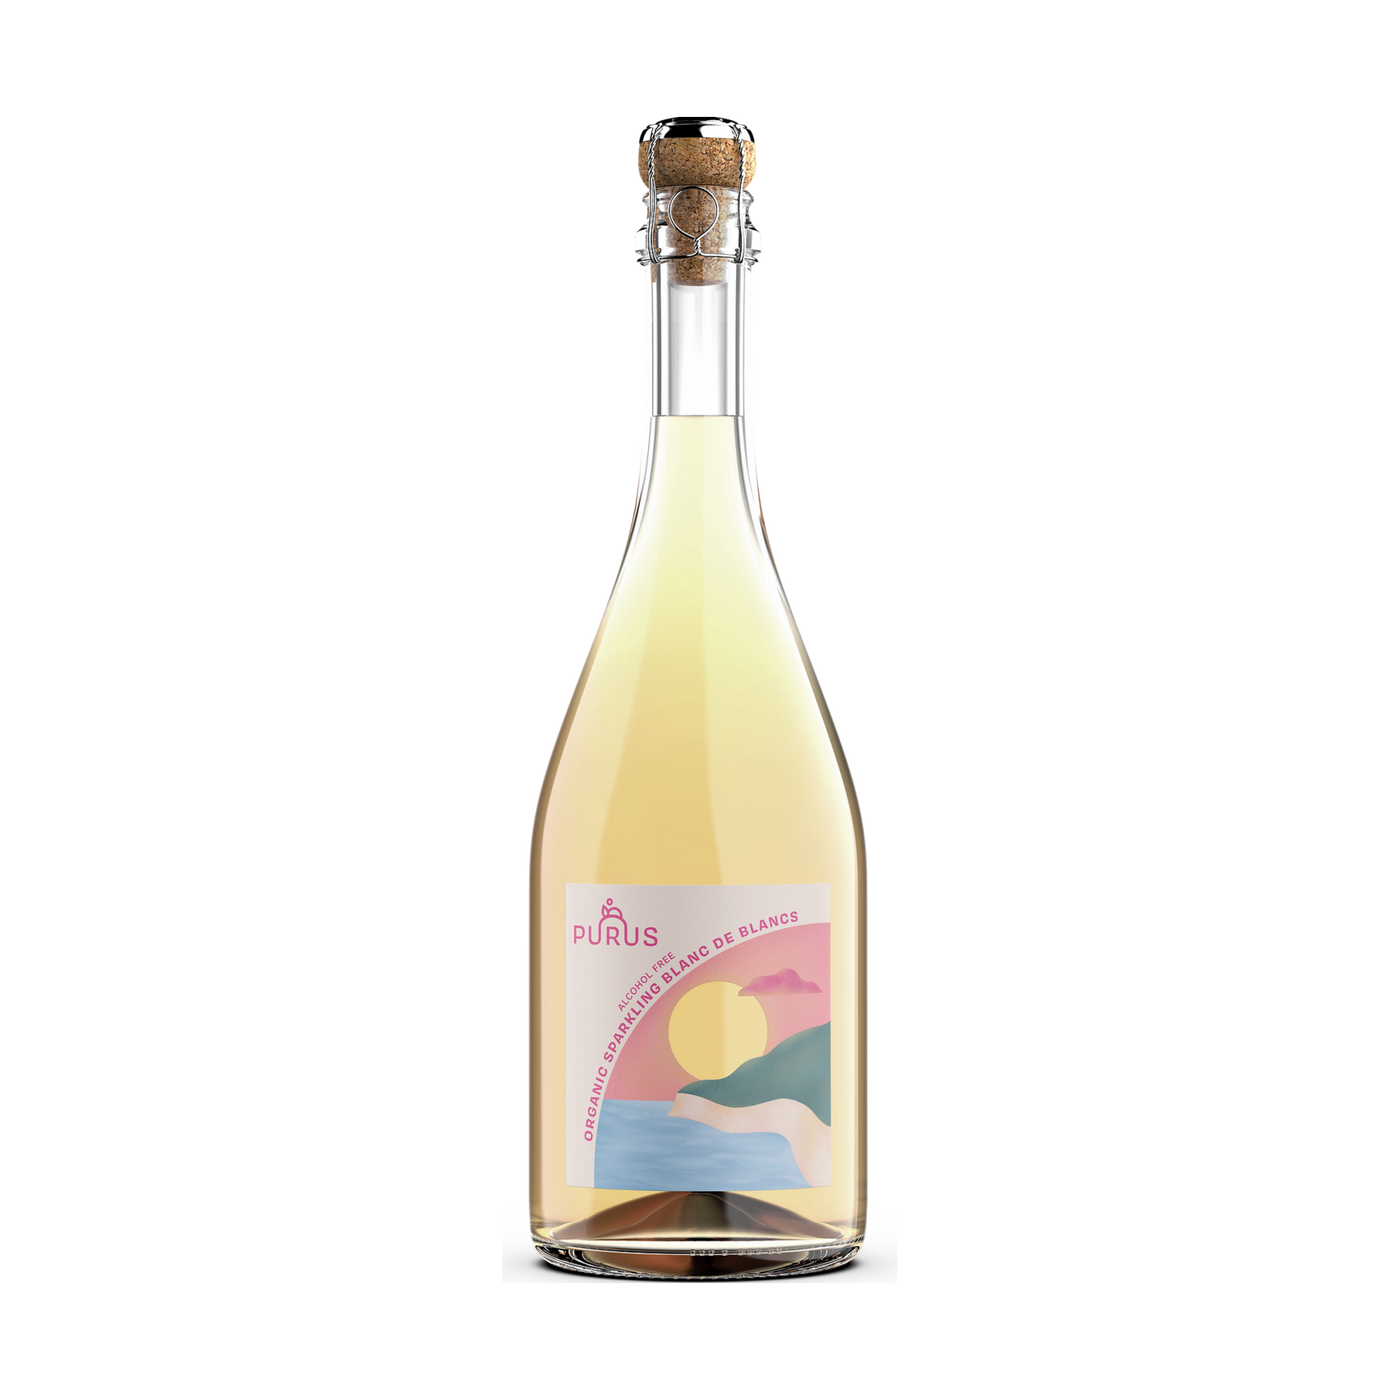 Purus Drink Canada - alcohol free Canada - organic sparkling blanc de blancs - Rave & behave -  An organic sparkling Blanc de Blancs that will be there for you when you want to have a fun time, but want to skip the alcohol bit.